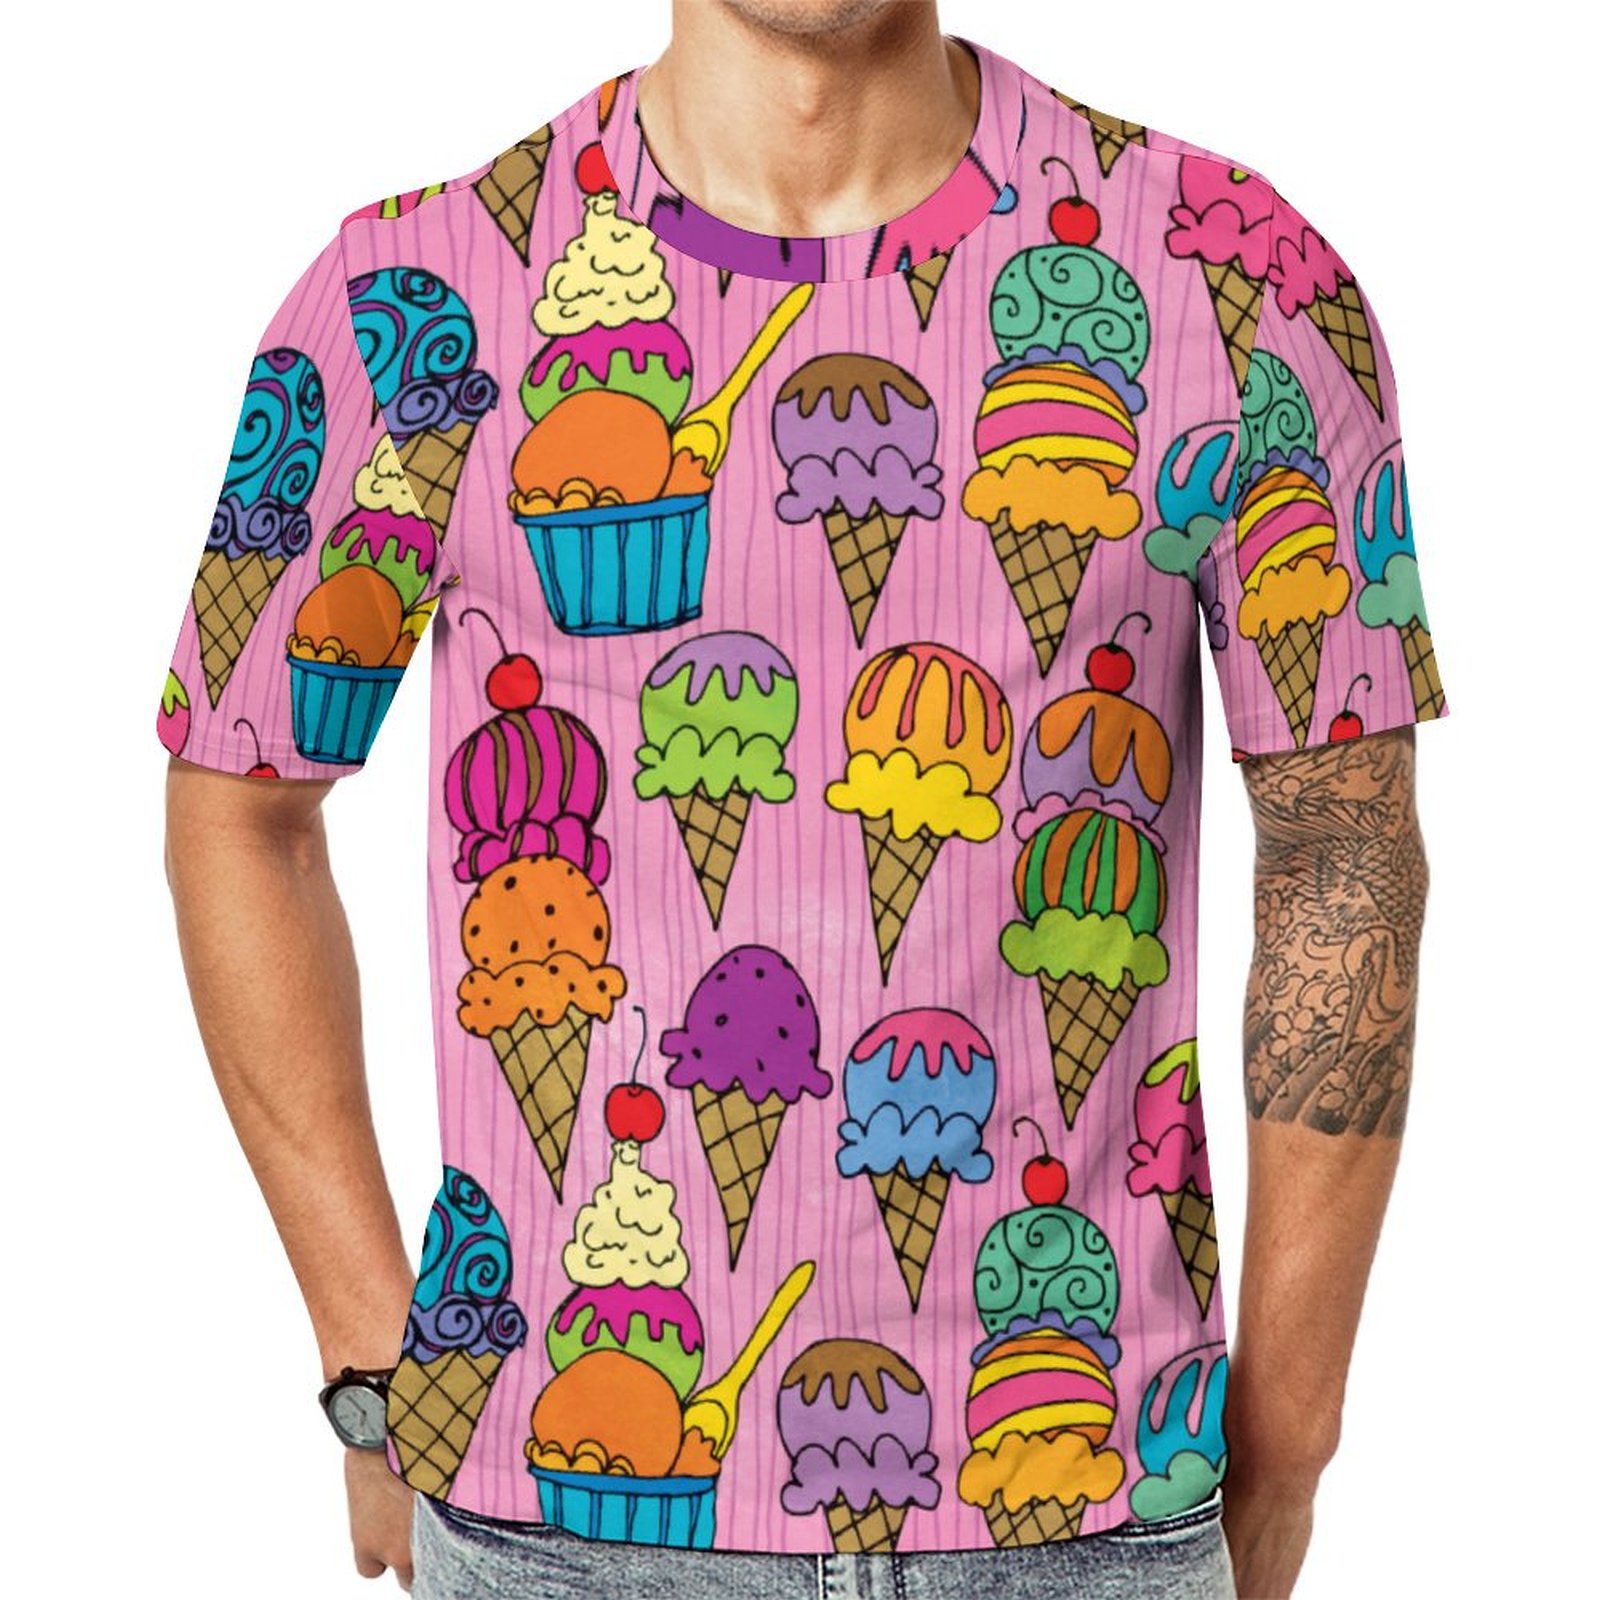 Ice Cream Cones Dessert On Pink Whimsical Short Sleeve Print Unisex Tshirt Summer Casual Tees for Men and Women Coolcoshirts